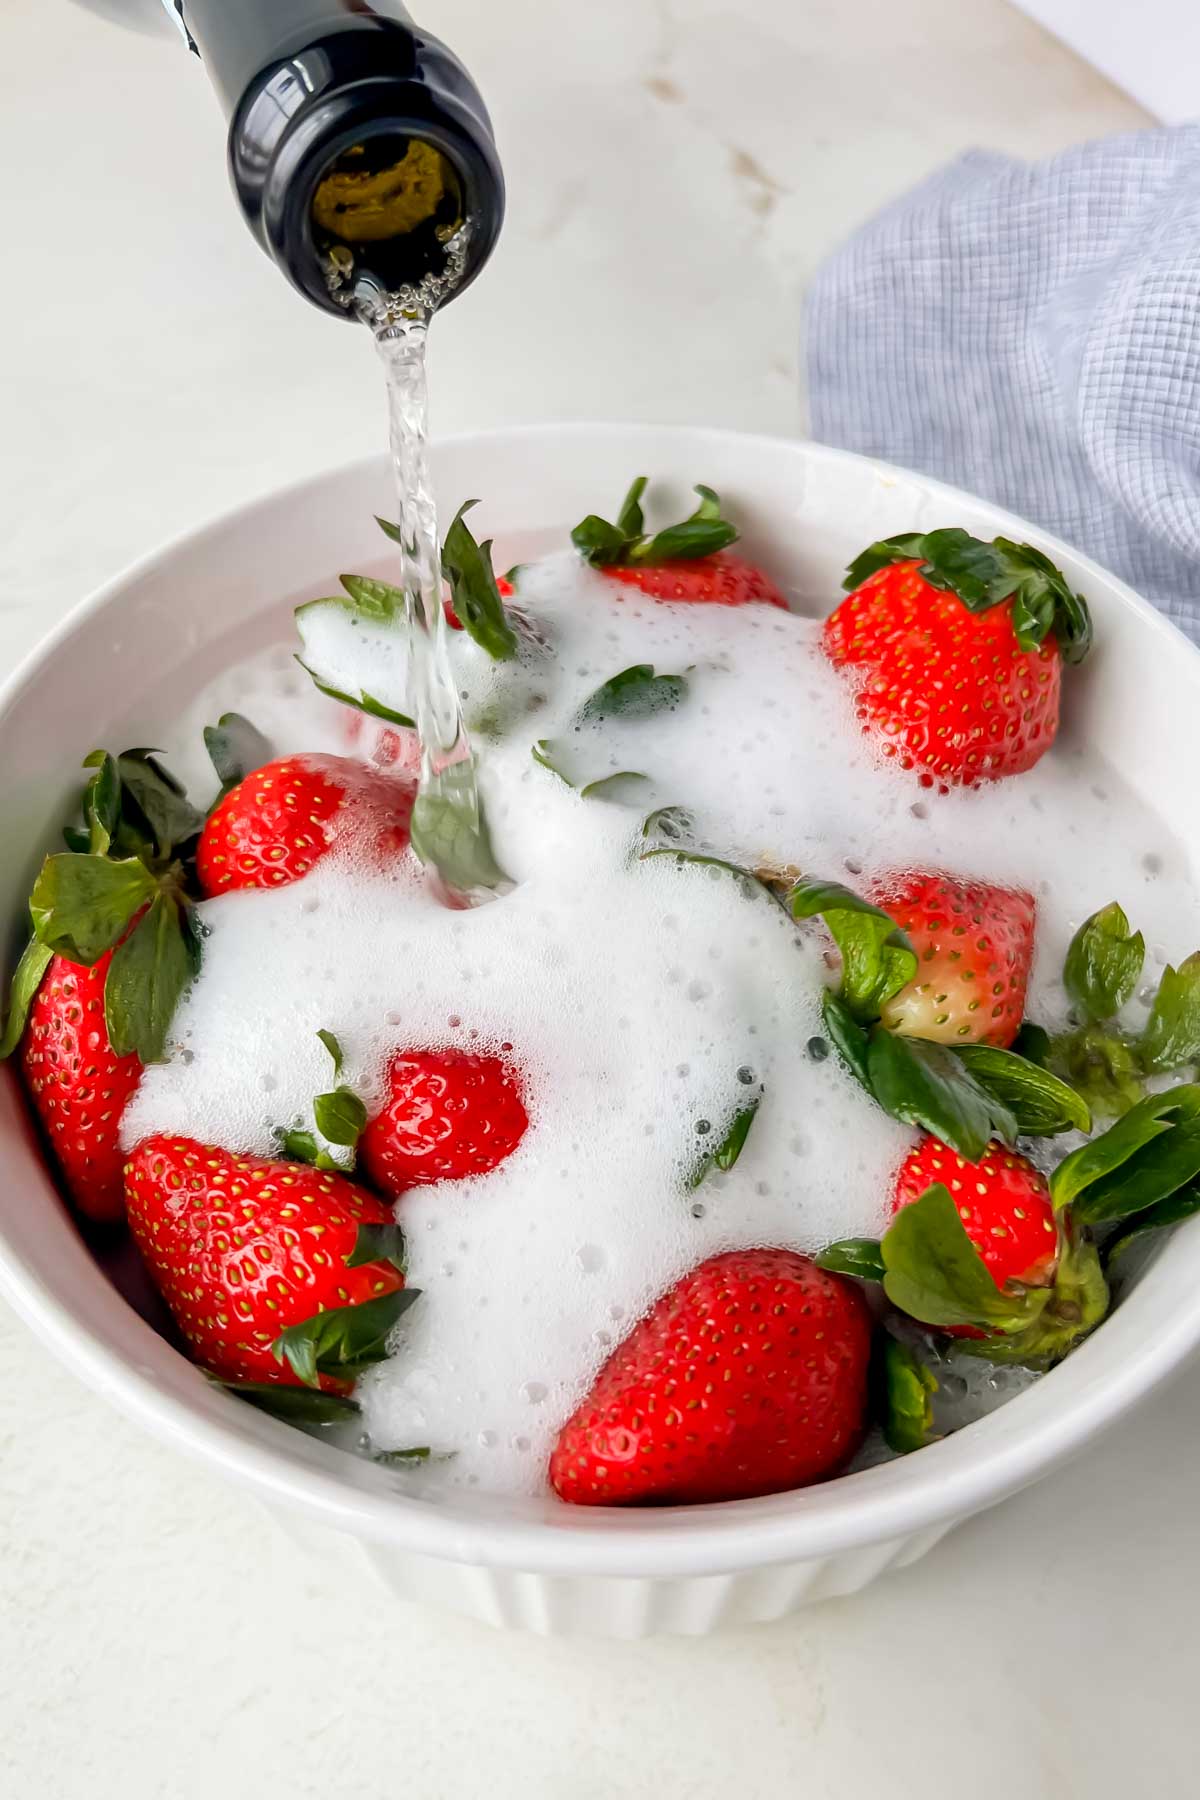 Champagne being poured over fresh strawberries.